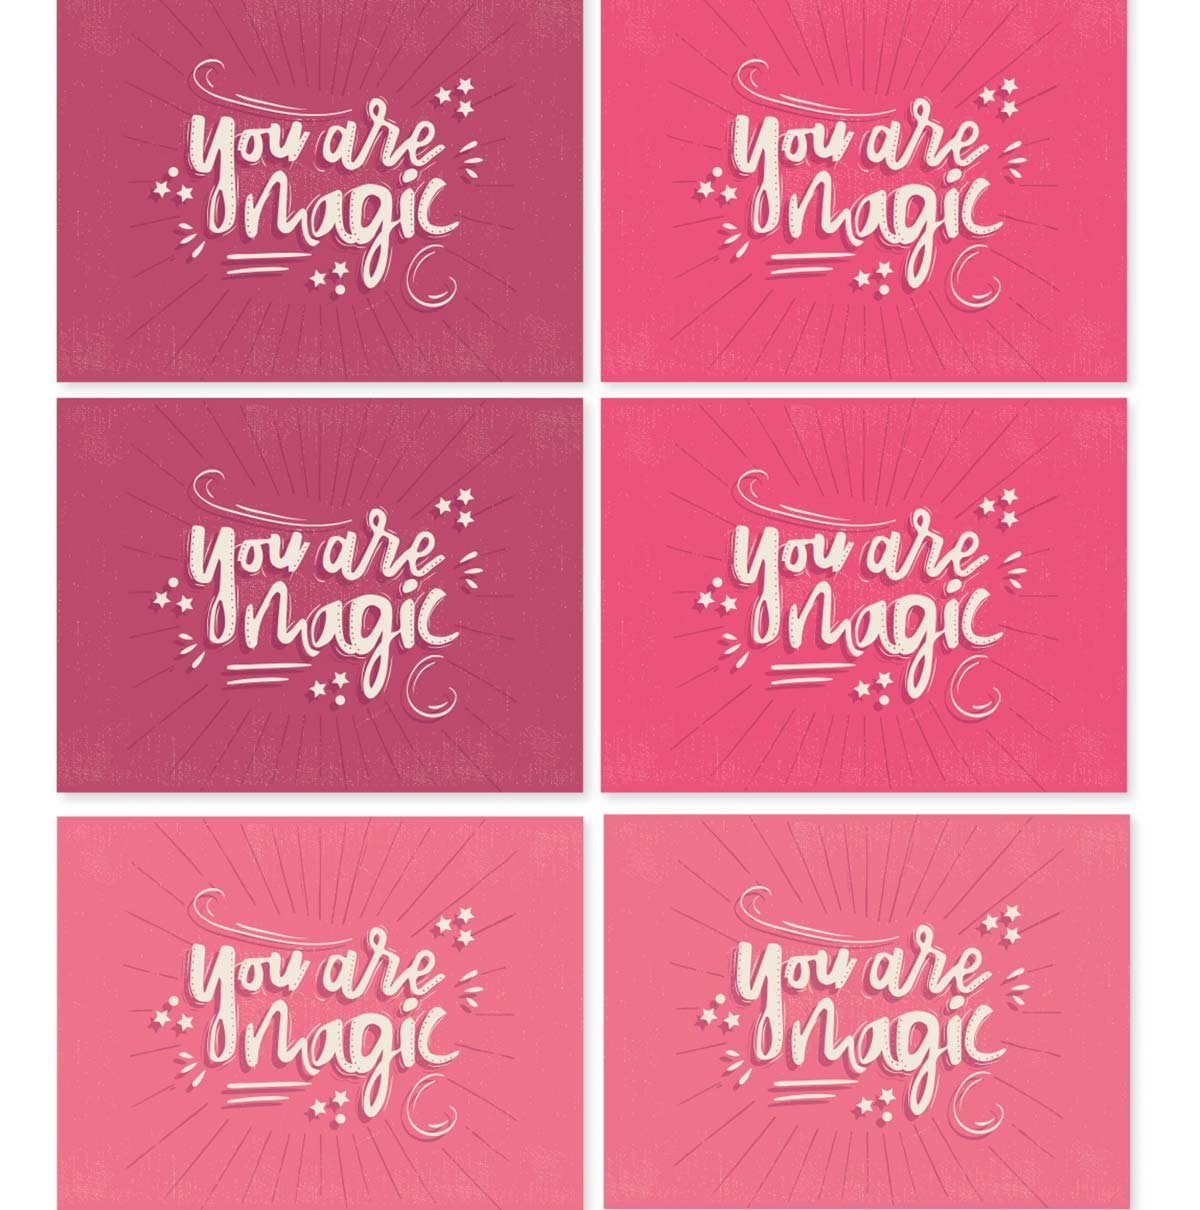 individuales you are magic 2